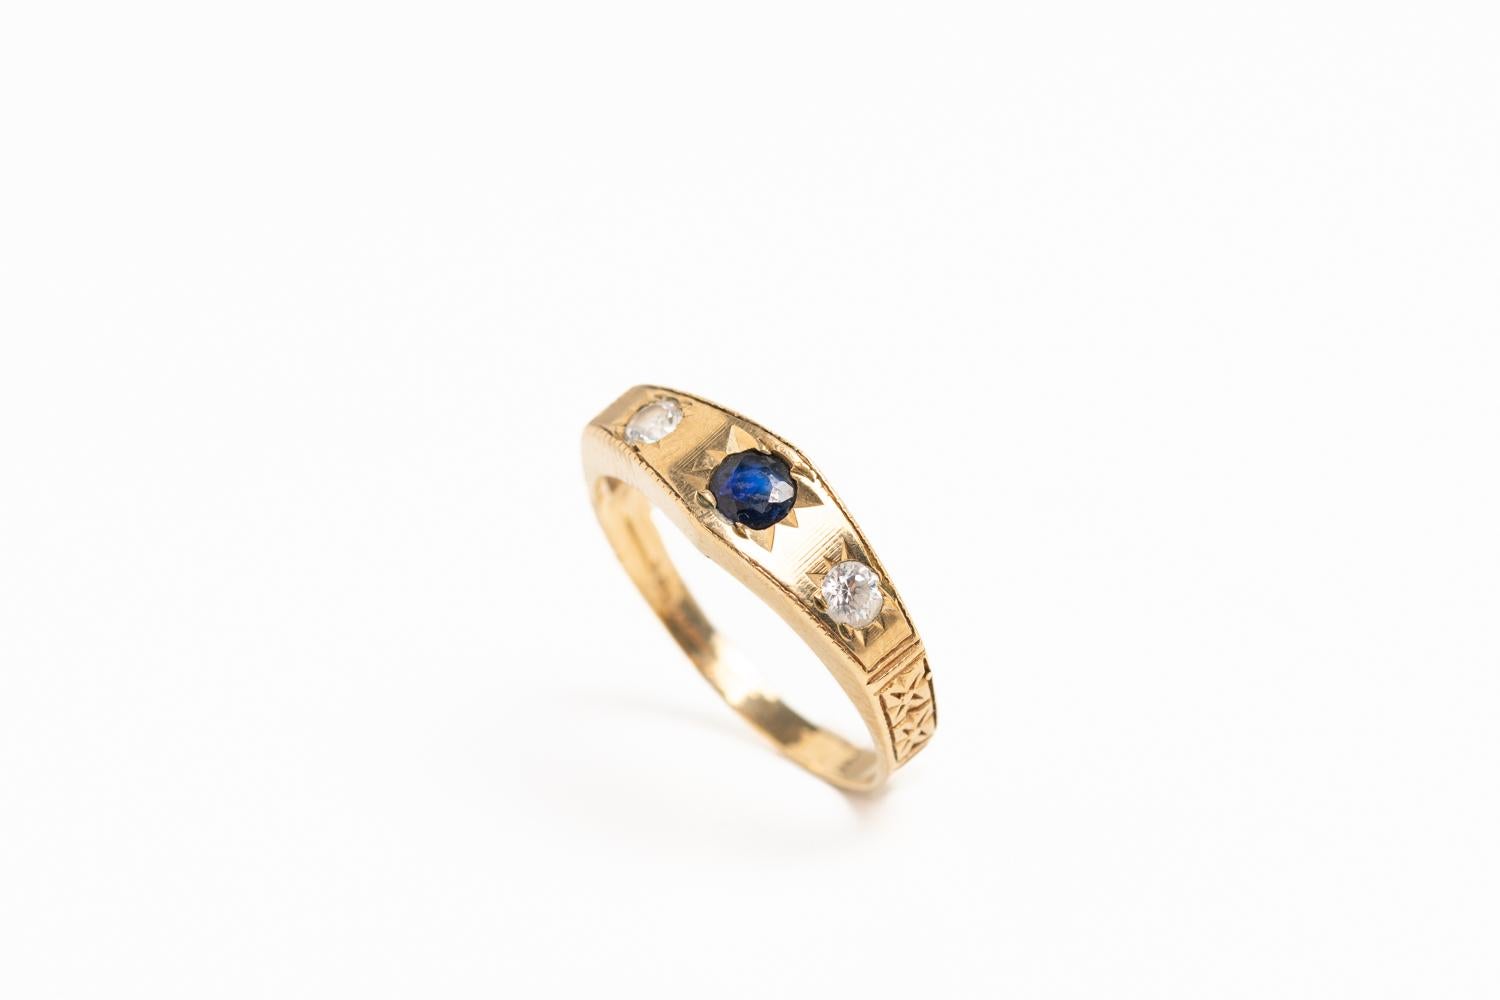 Elegant vintage 9ct gold sapphire and diamond ring. The ring has two sparkling diamonds on each side with a sapphire in the centre. Decorated with a floral motif on the band. Fully hallmarked for 9ct gold with a London assay mark. 

Size: K